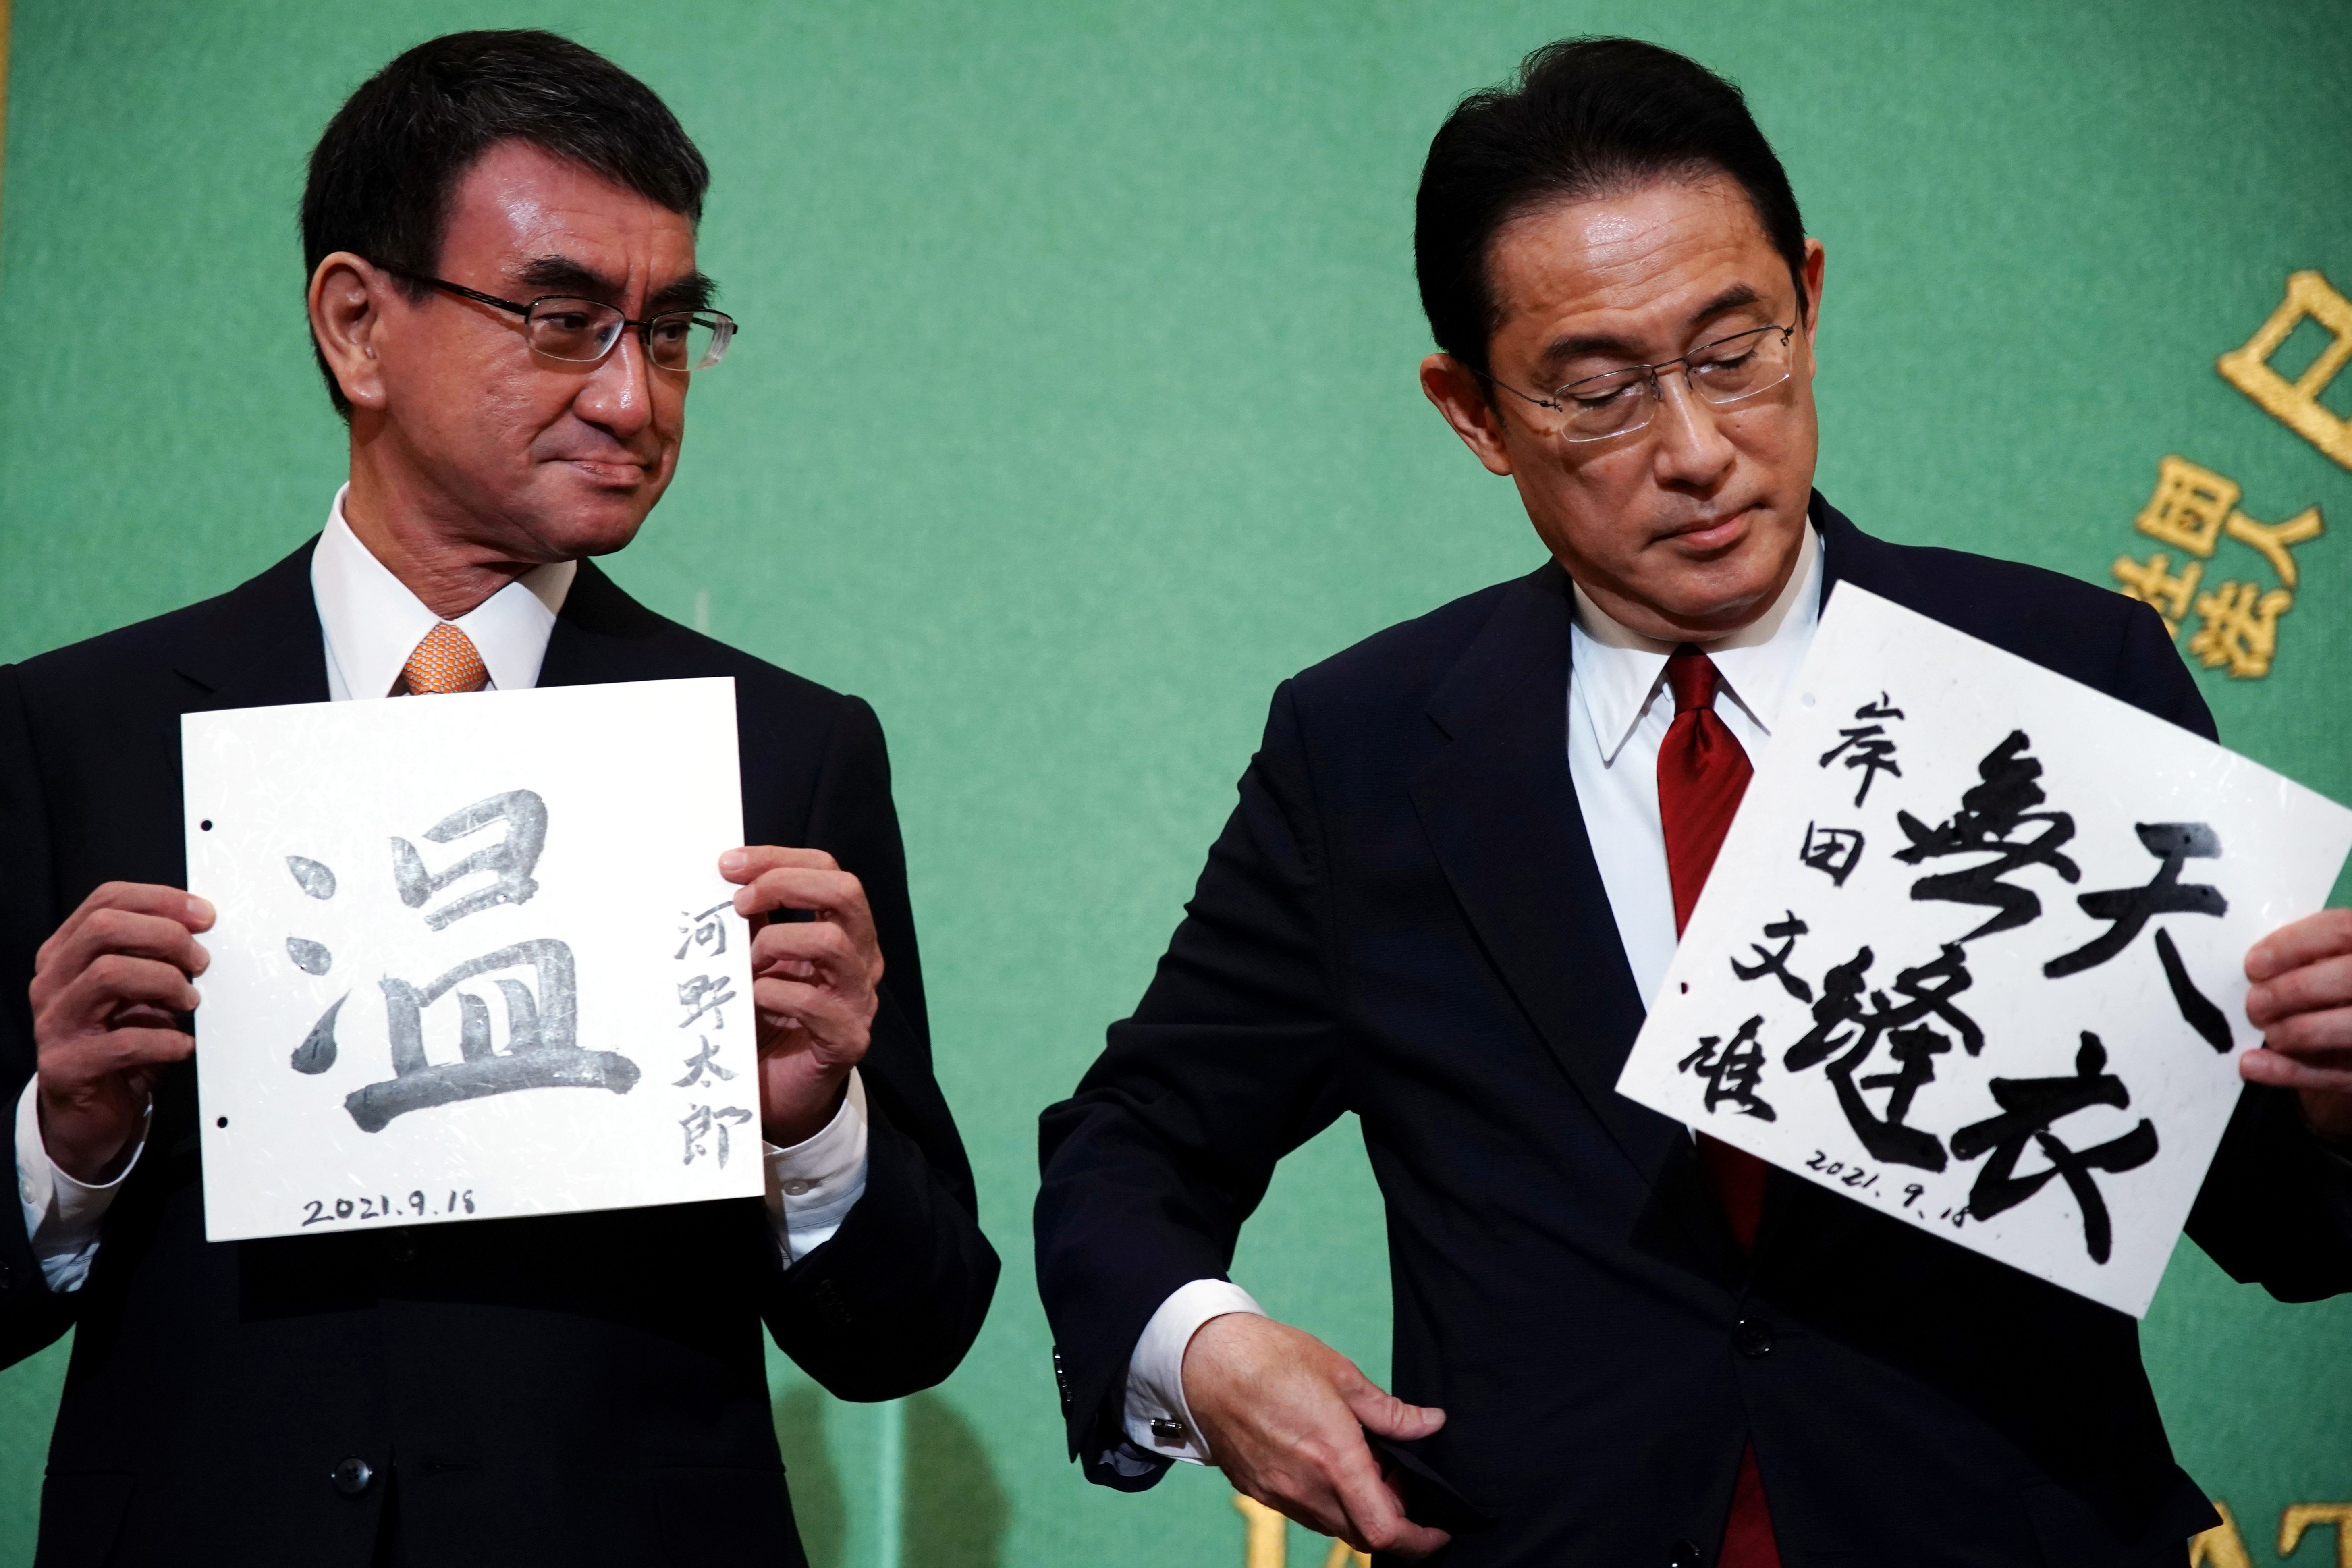 Japan PM candidates deny toning down views on nuclear, gender issues to attract votes